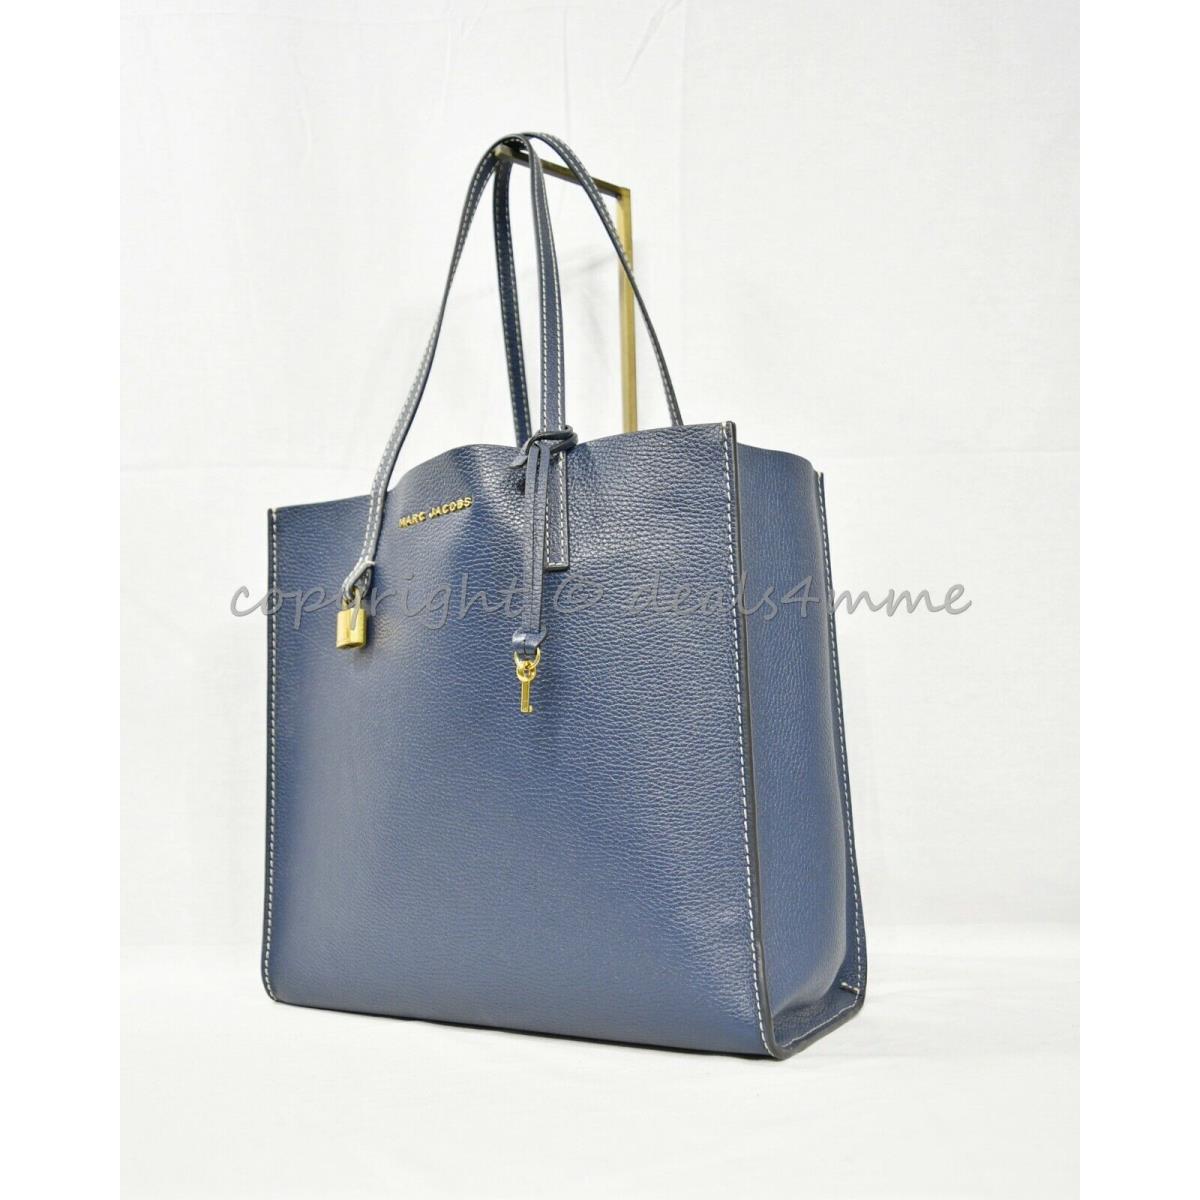 Marc By Marc Jacobs M0012669 The Grind East/west Leather Shopper Tote. Blue Sea